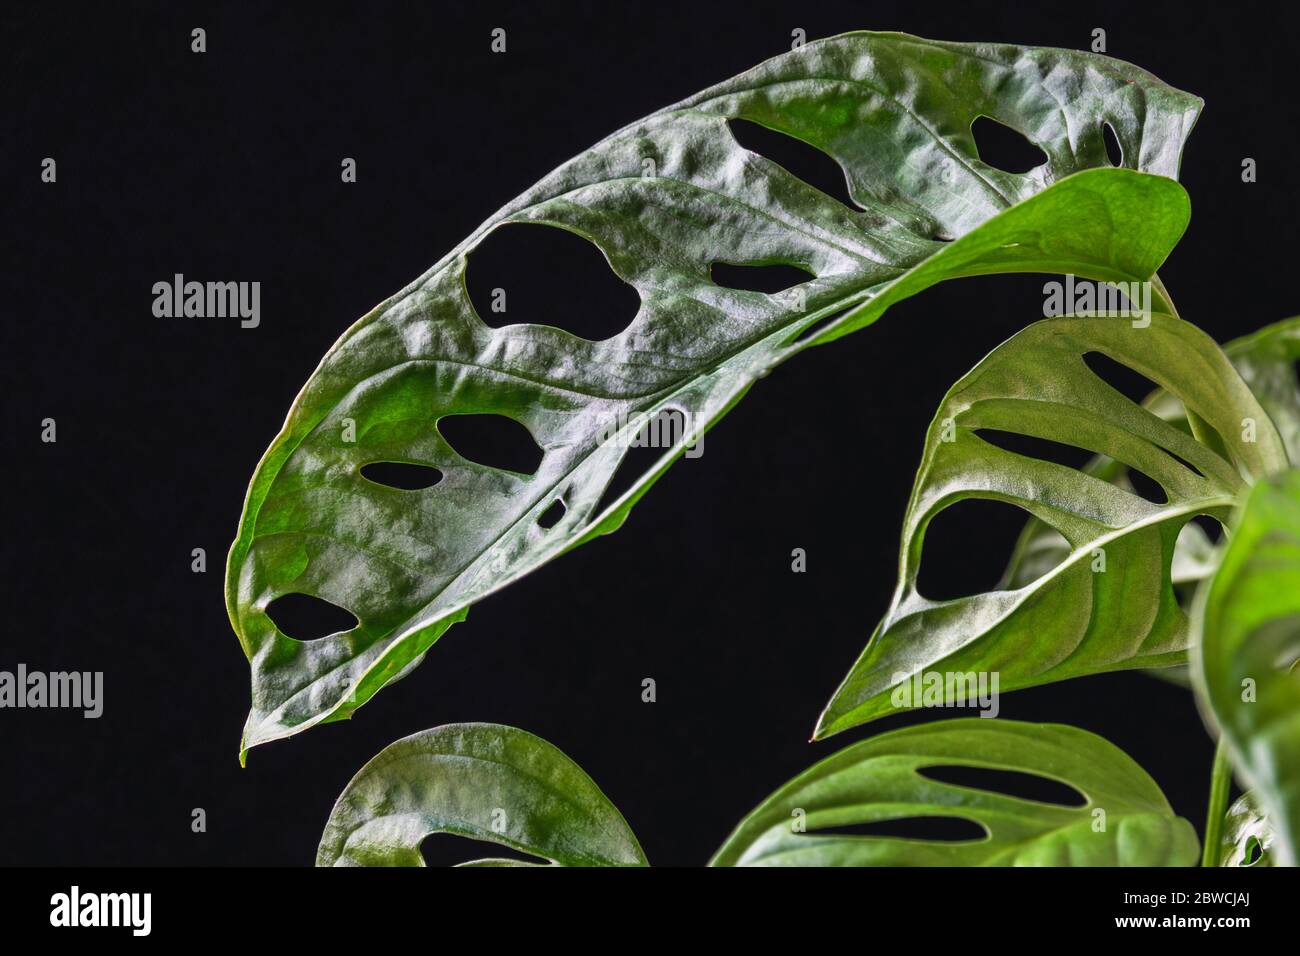 Close-up on a Swiss cheese plant (monstera adansonii) with leaf fenestrations on a dark background. Beautiful tropical houseplant detail. Stock Photo